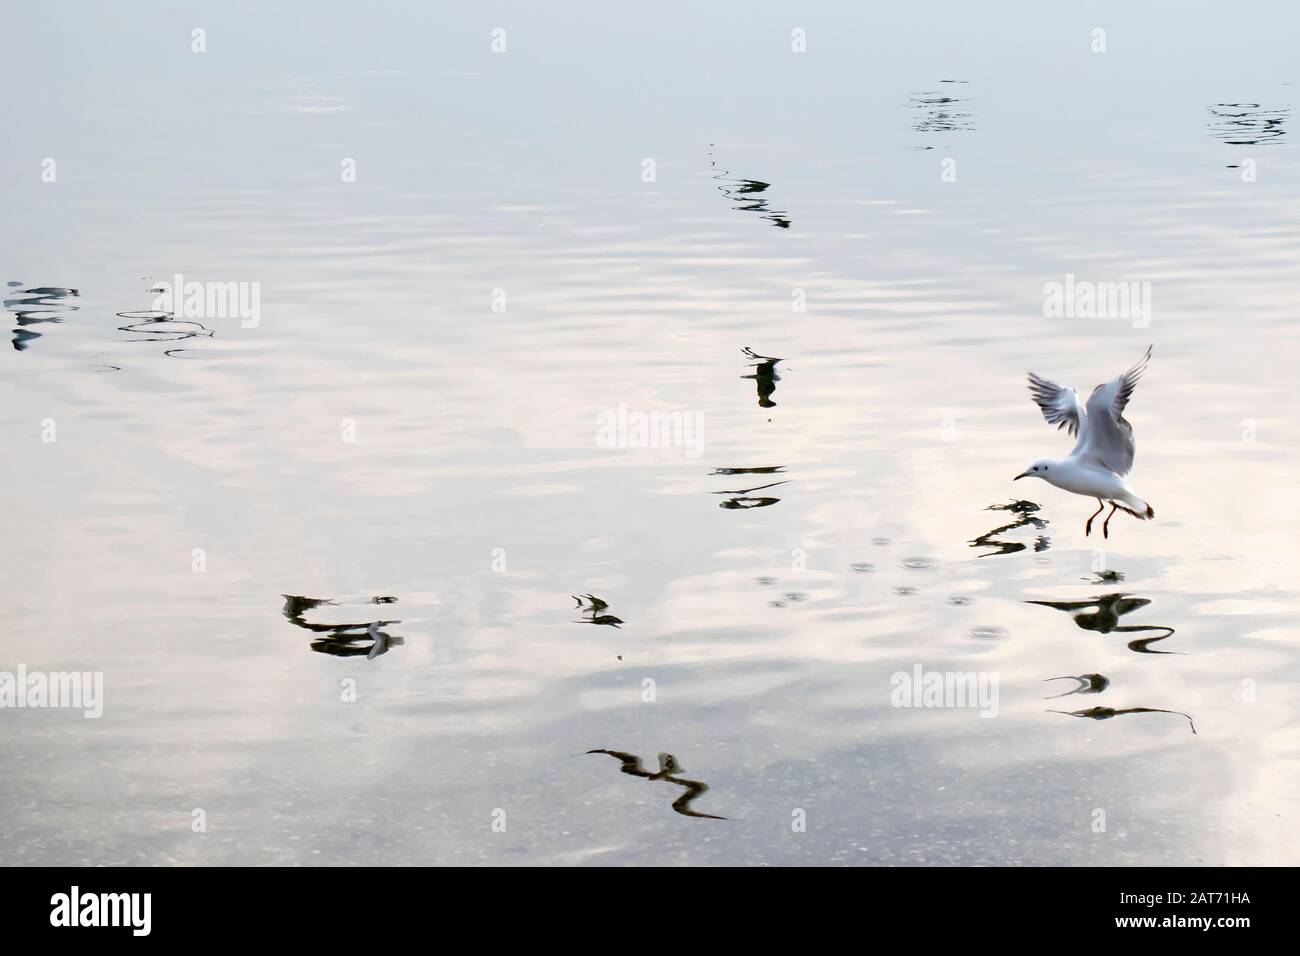 One seagull flying above river, and reflection of other birds on water surface Stock Photo